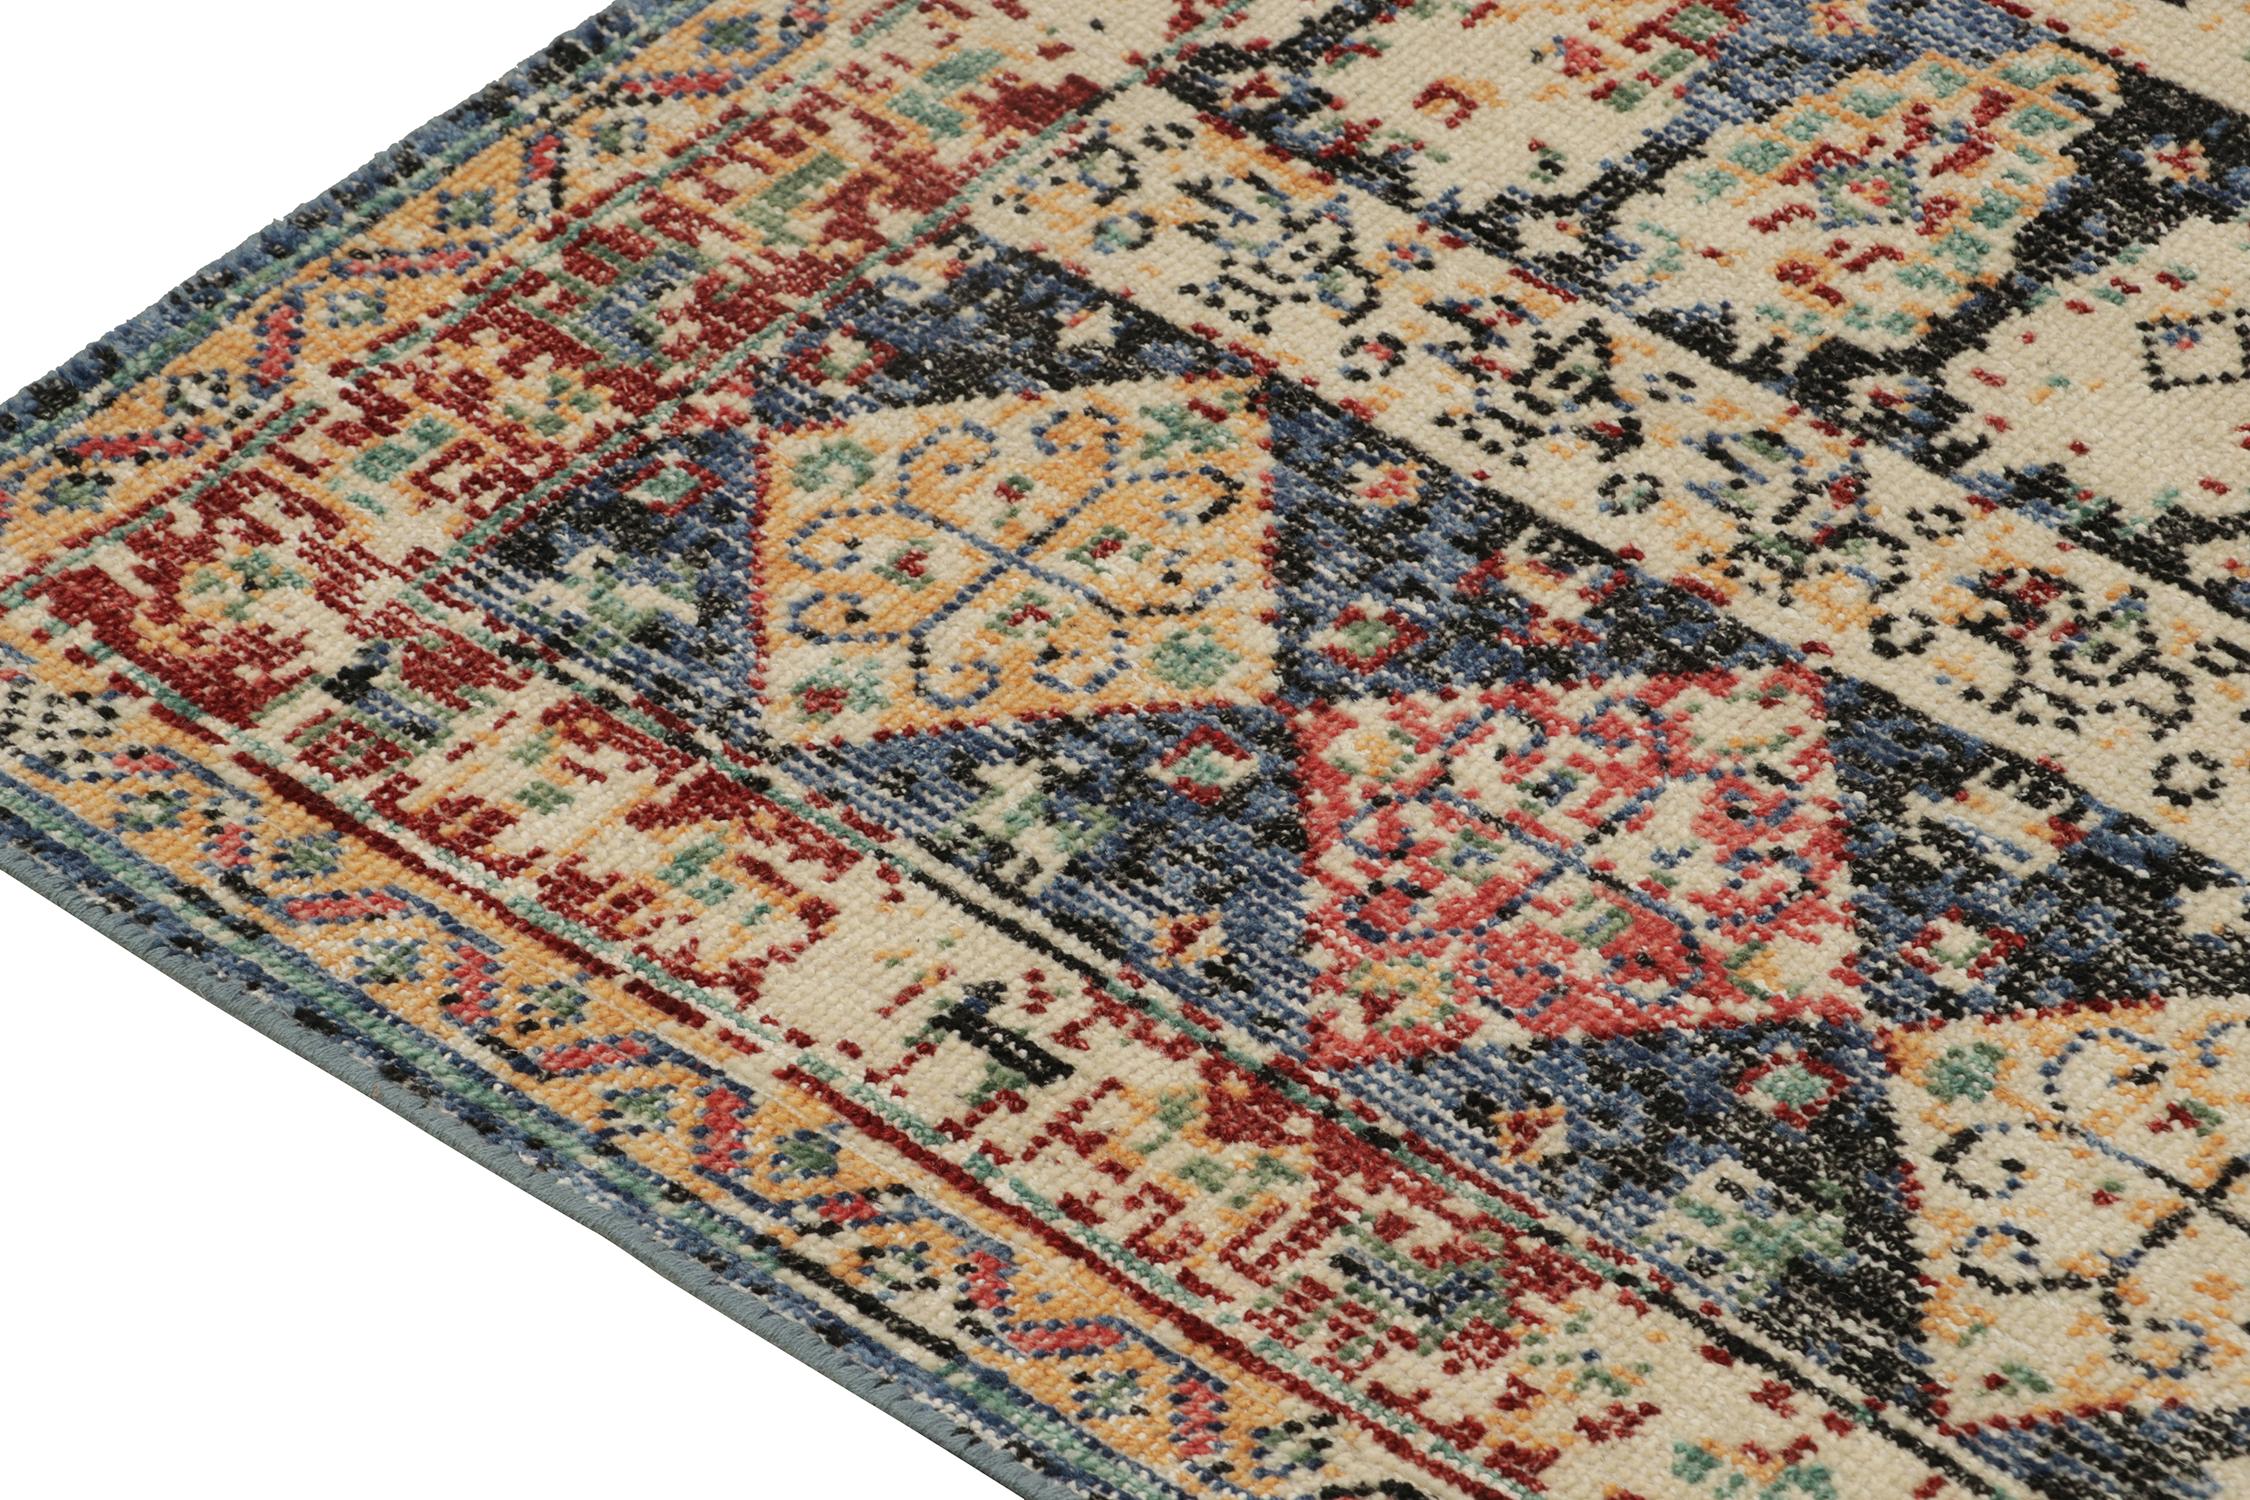 Tapis & Kilim's Distressed Tribal Style Runner in Polychromatic Geometric Patterns (Tapis et Kilim's Distressed Tribal Style Runner) Neuf - En vente à Long Island City, NY